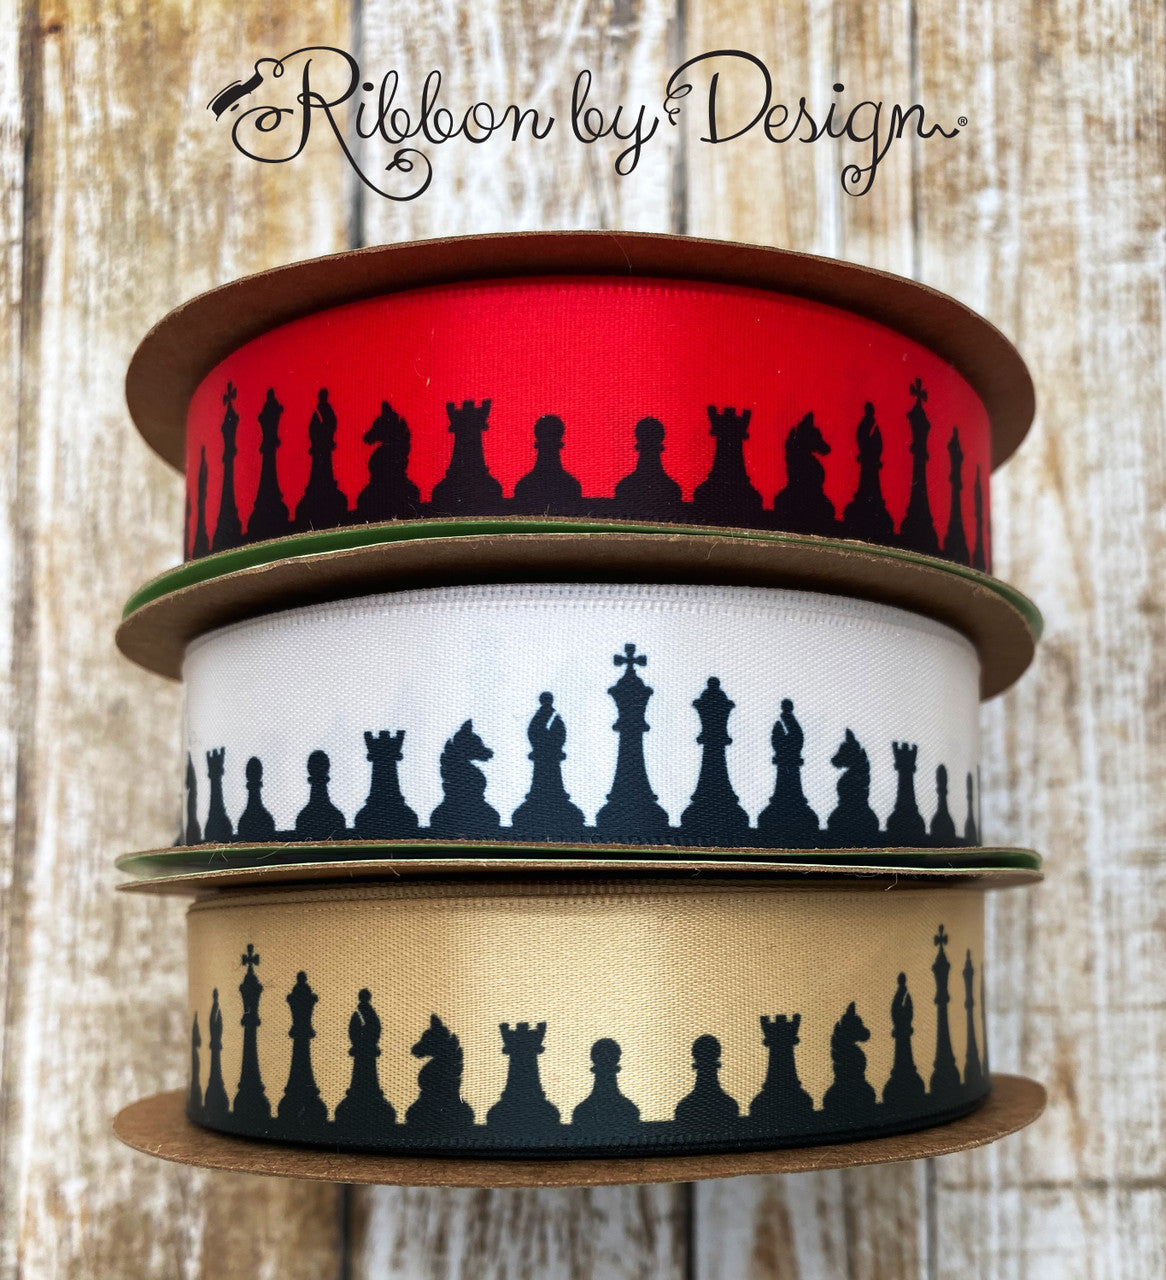 Our chess themed ribbon comes in three colors, red, gold and tan for mixing and matching your chess or gaming themed craft projects.